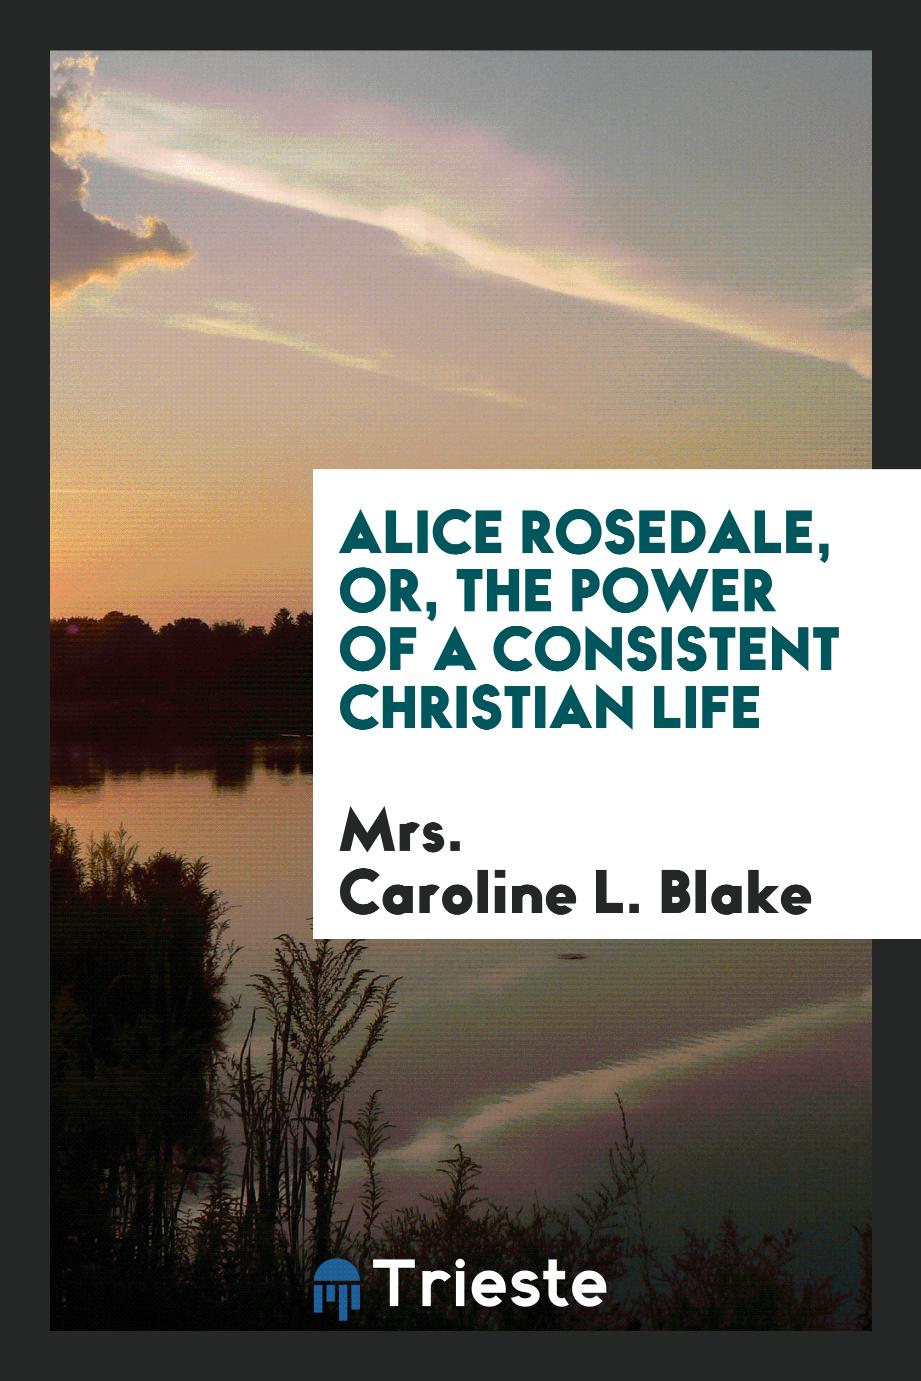 Alice Rosedale, or, The Power of a Consistent Christian Life